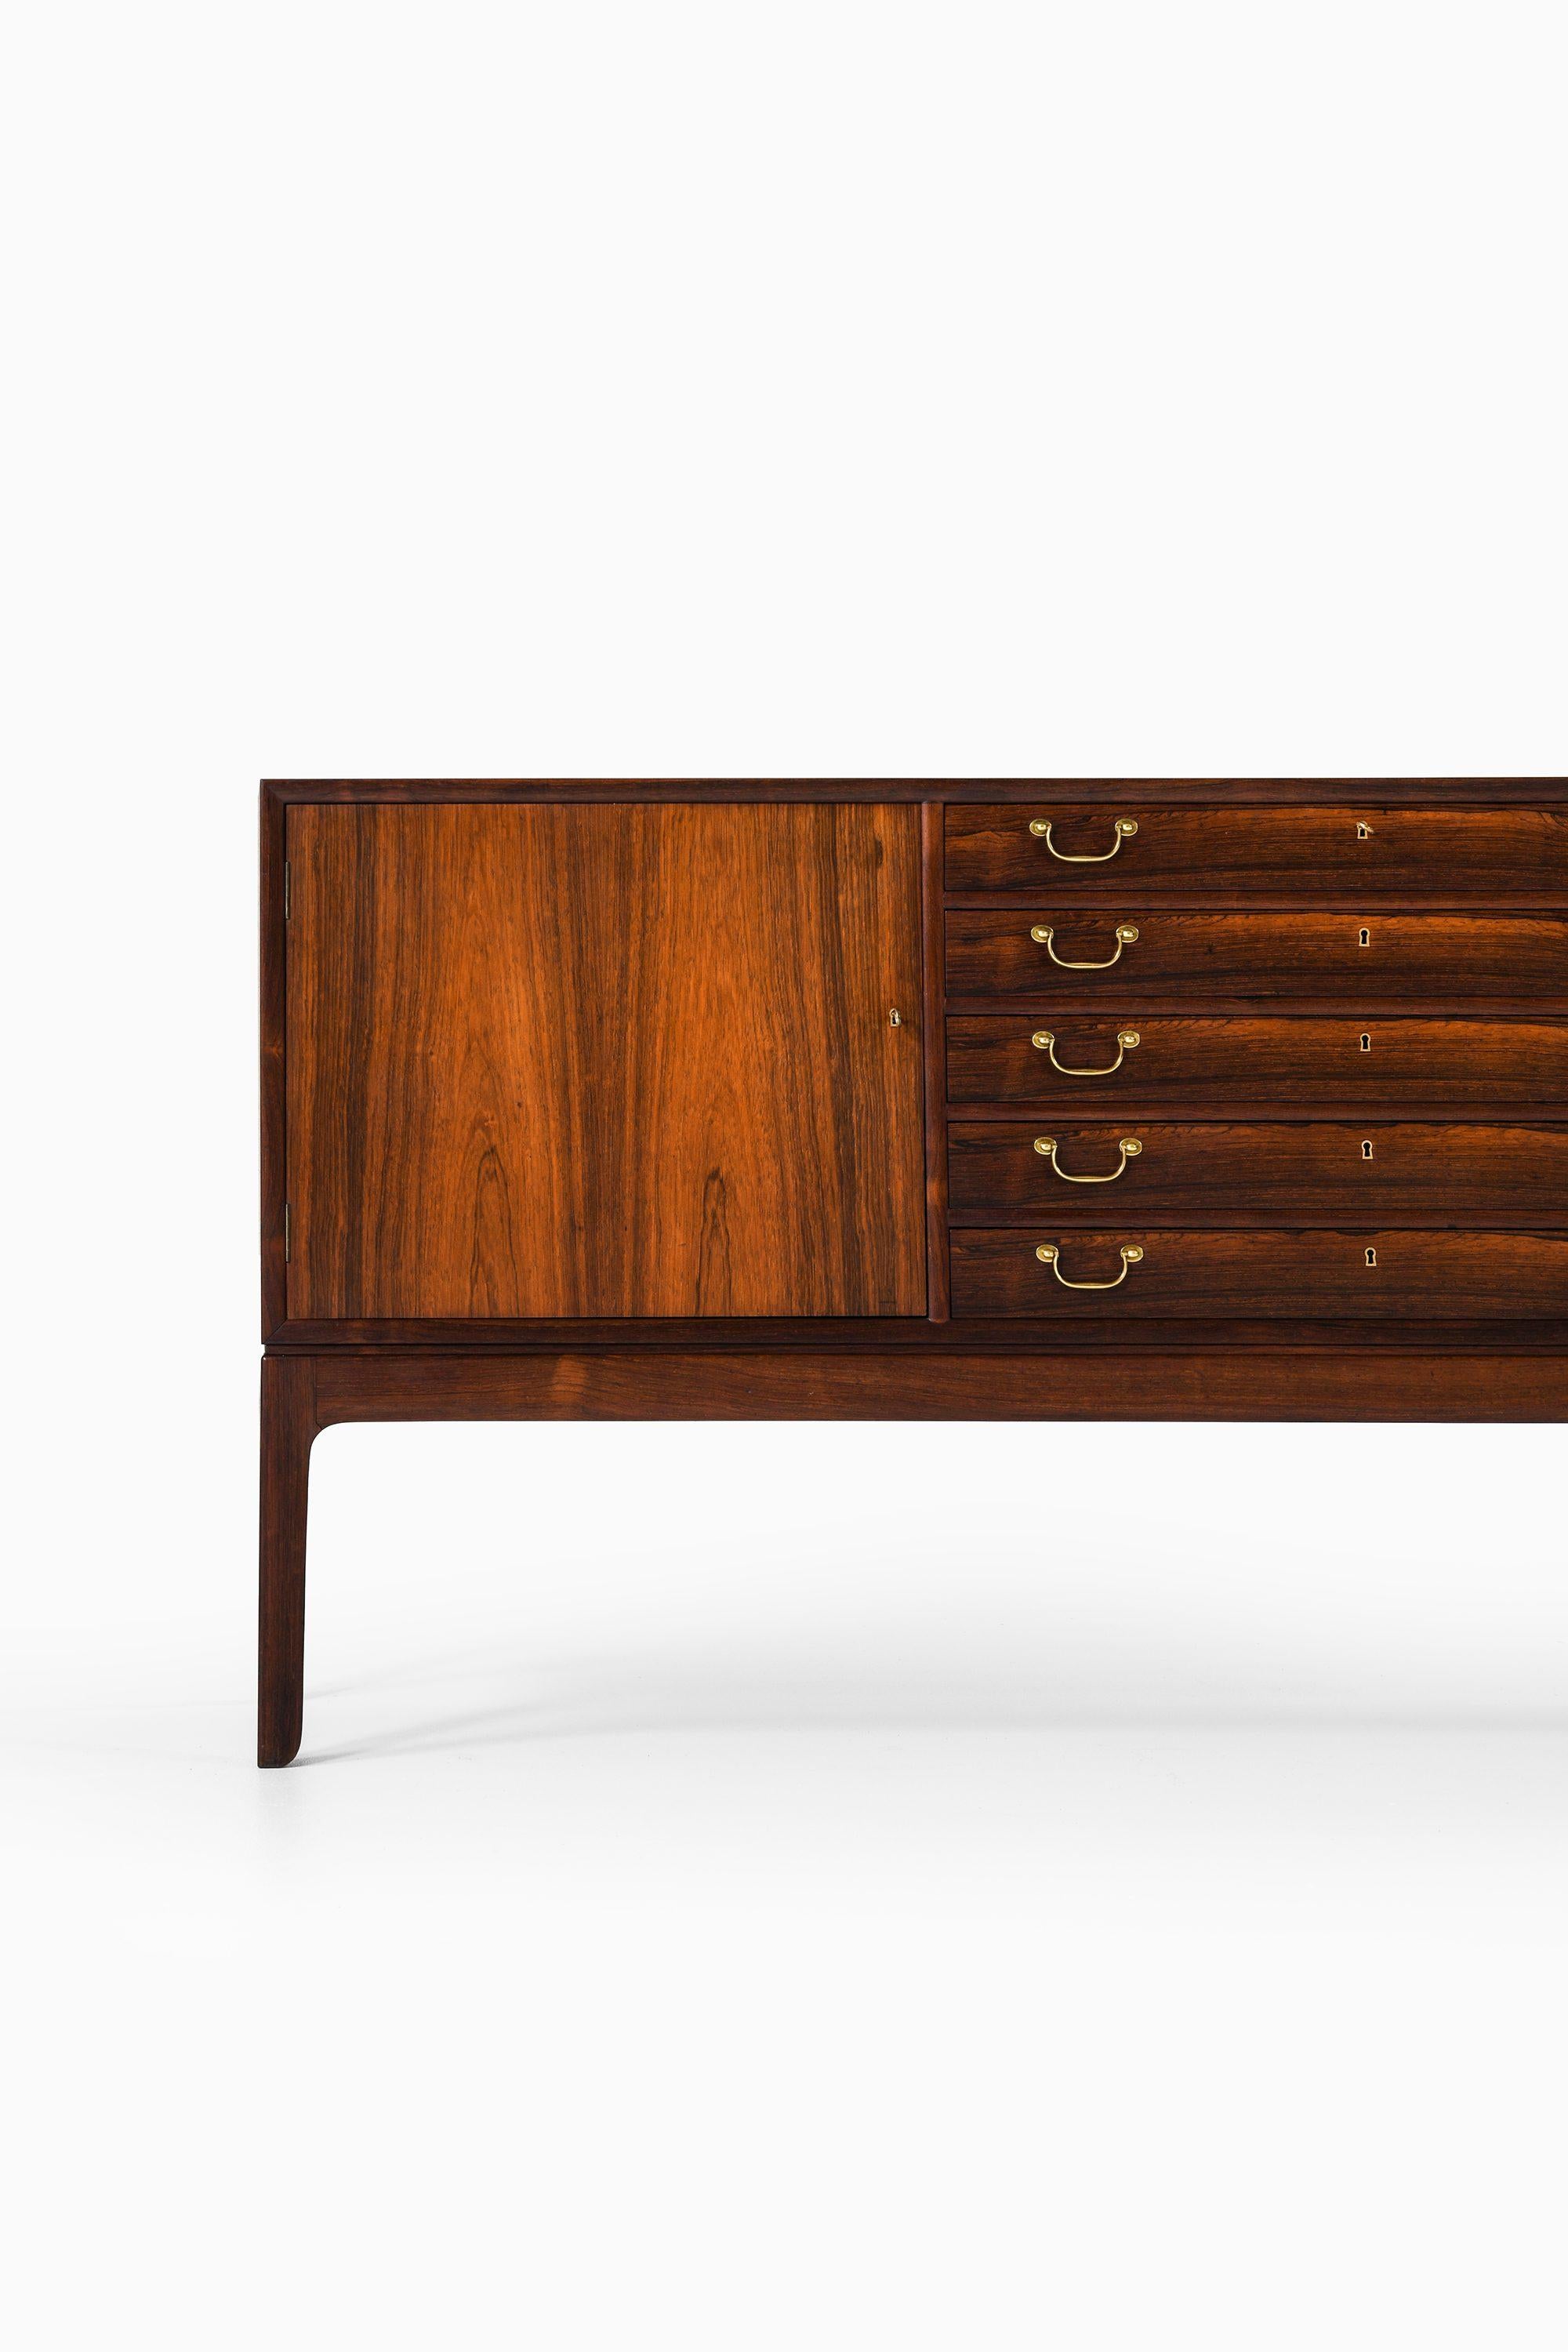 Danish Sideboard in Rosewood and brass by Ole Wanscher For Sale